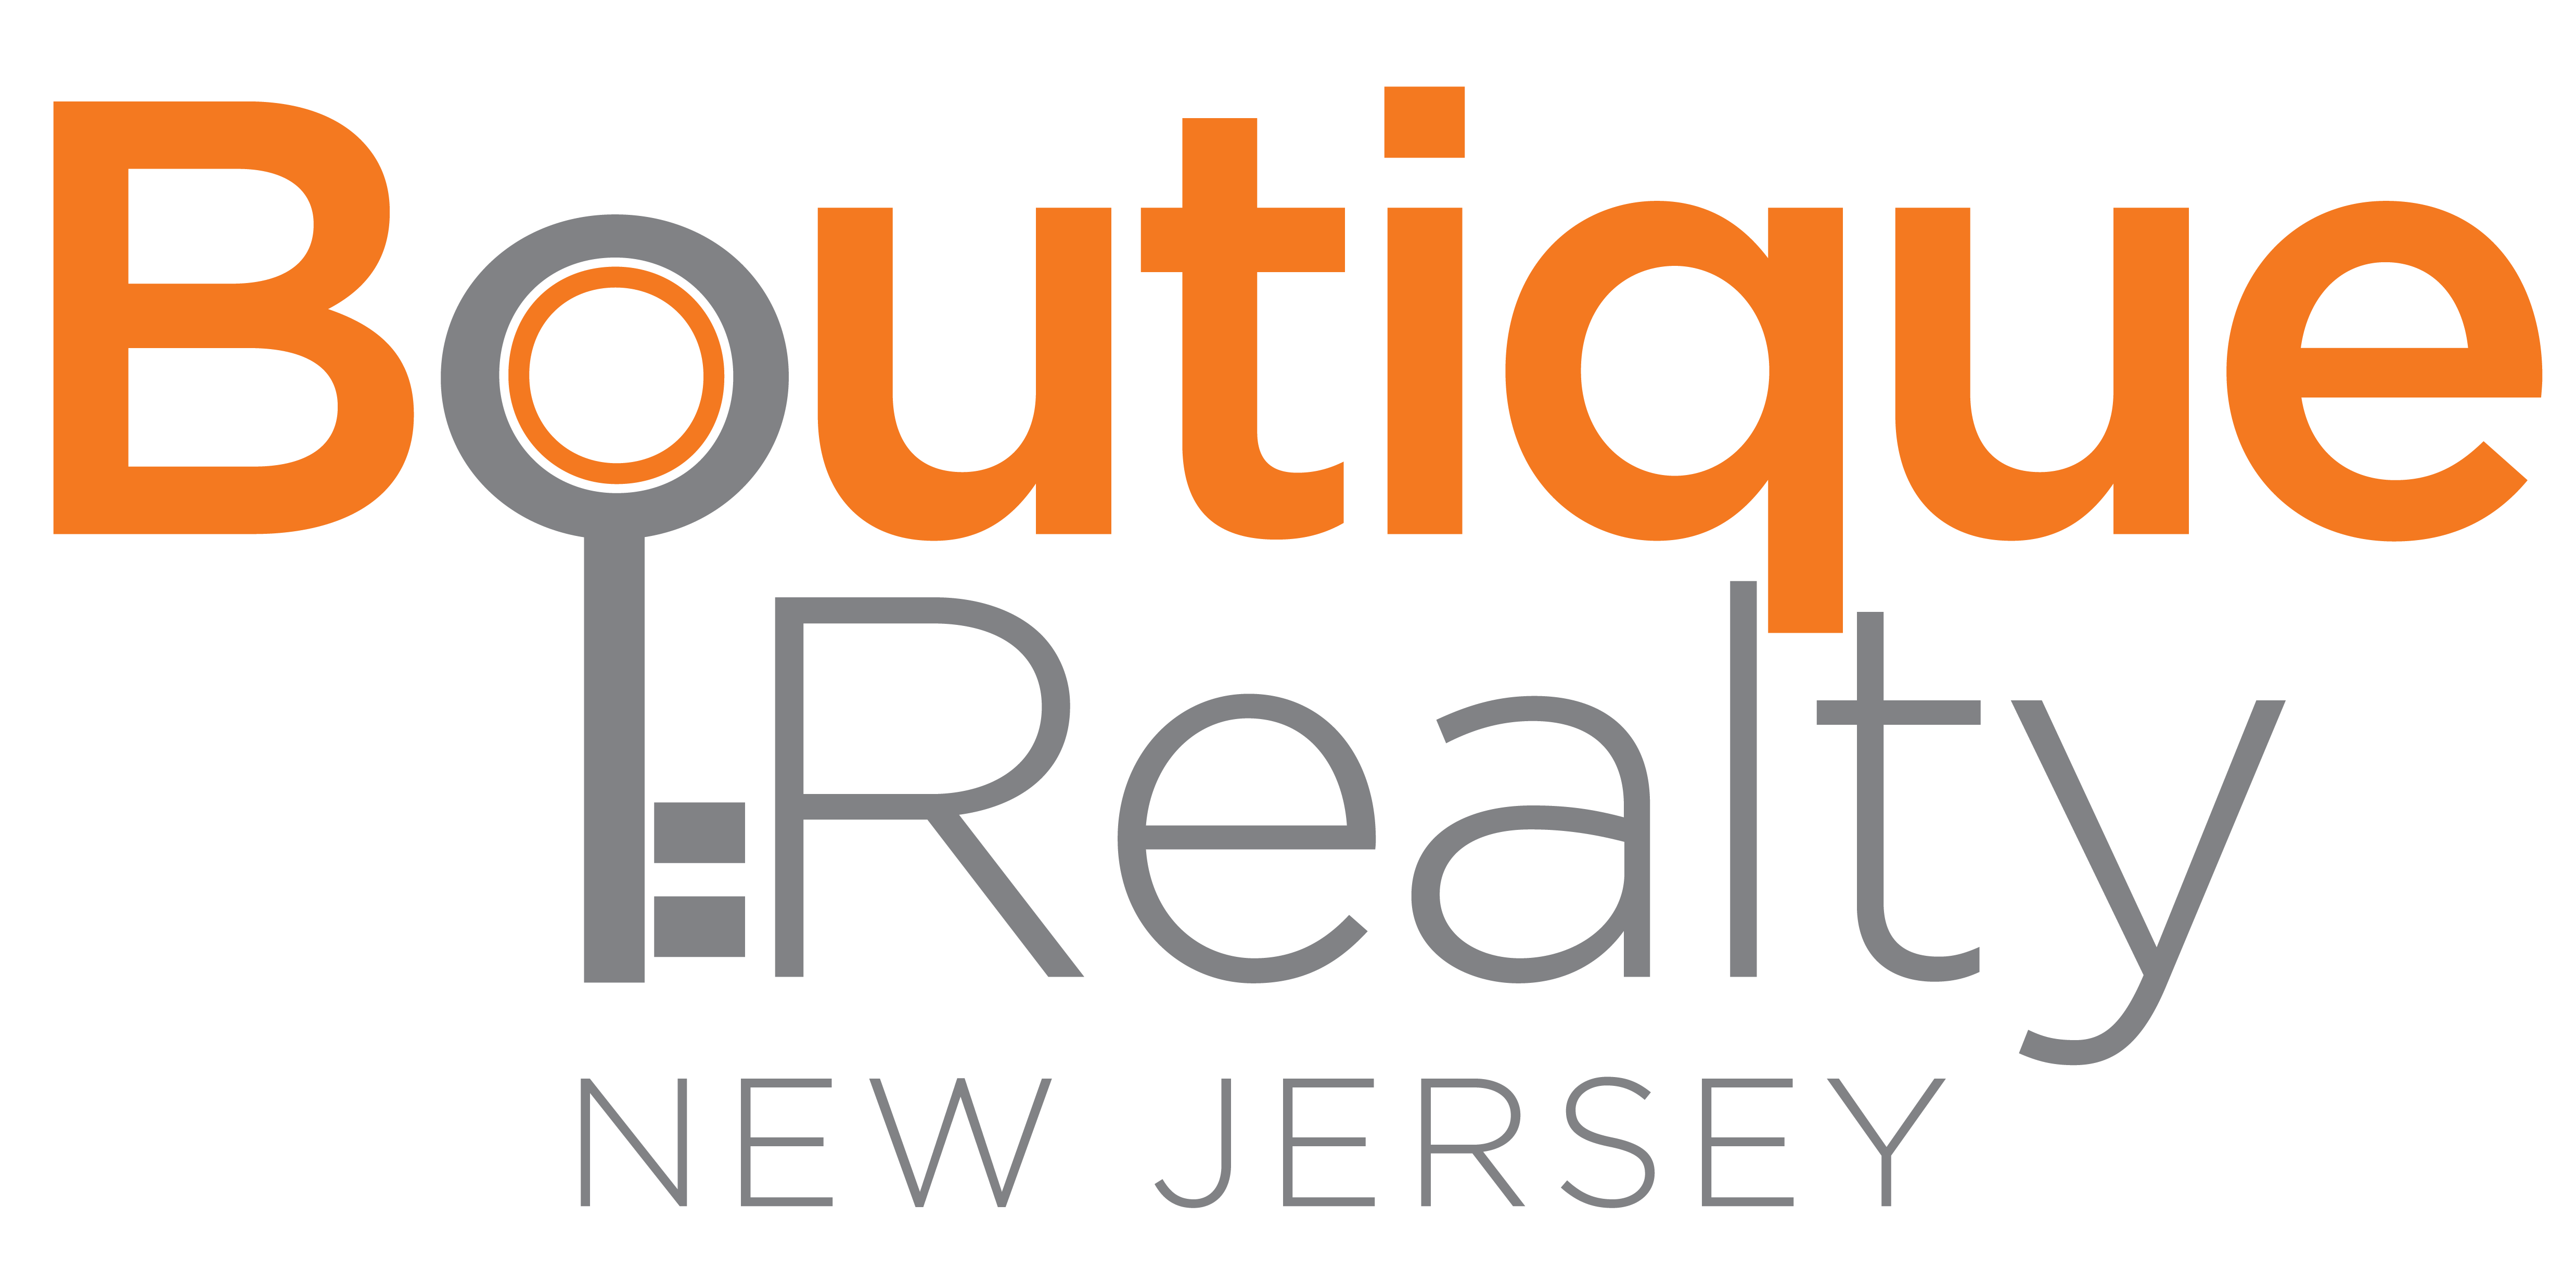 Boutique Realty